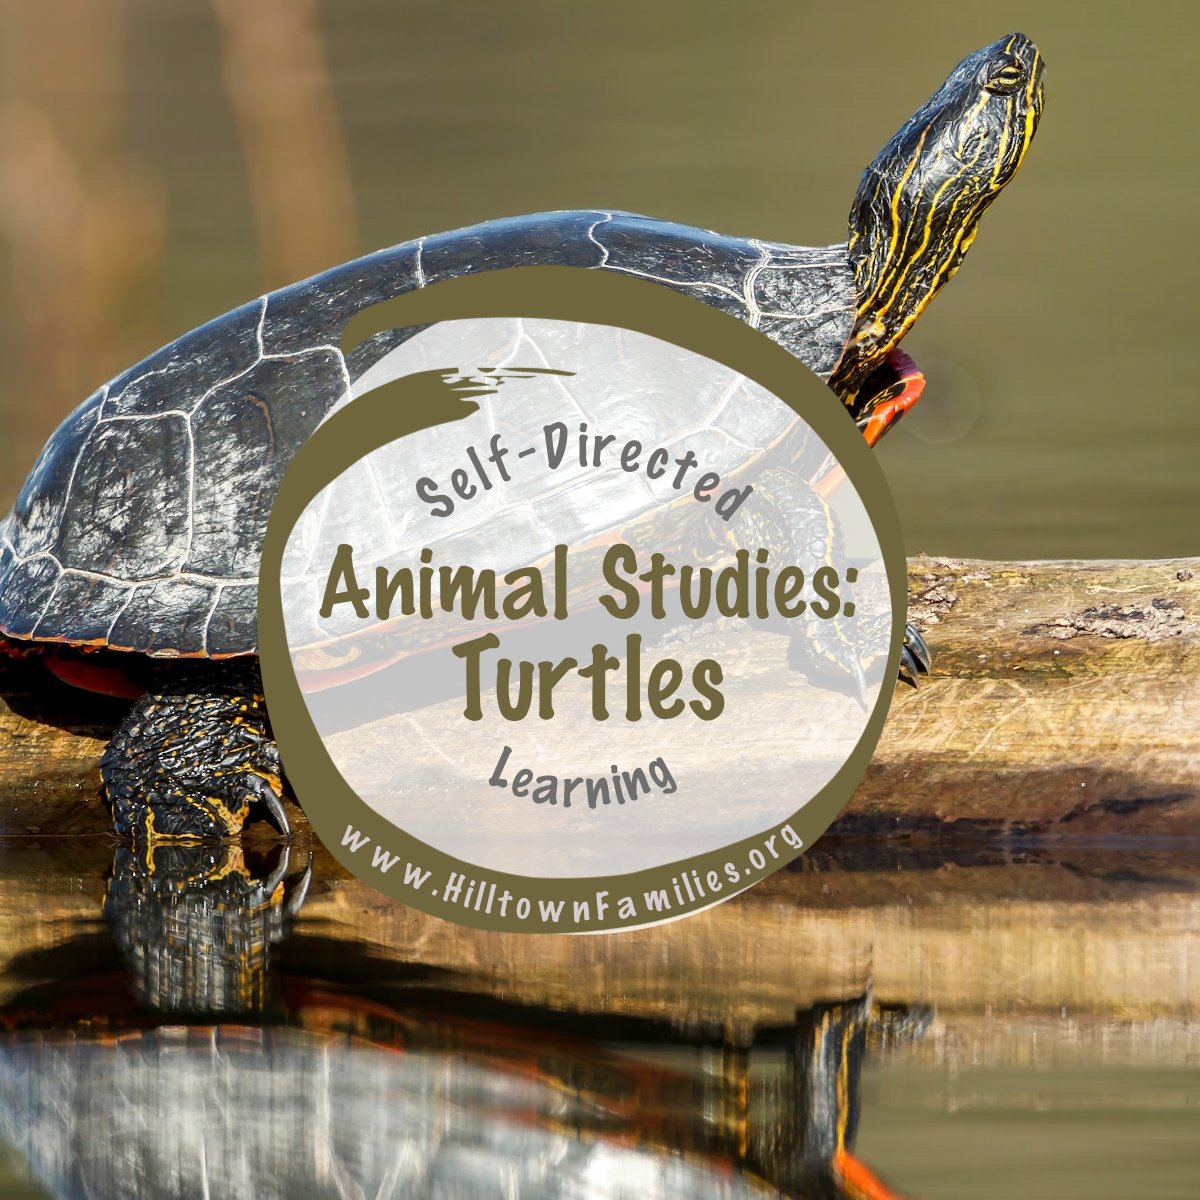 Explore New England turtles & the need for habitat protection. Support conservation to help overcome challenges & ensure ecosystem health. 🐢🌲 Discover more: bit.ly/HTF-Turtles

#turtles #cbedu #sde #selfdirectedlearning #herpetology